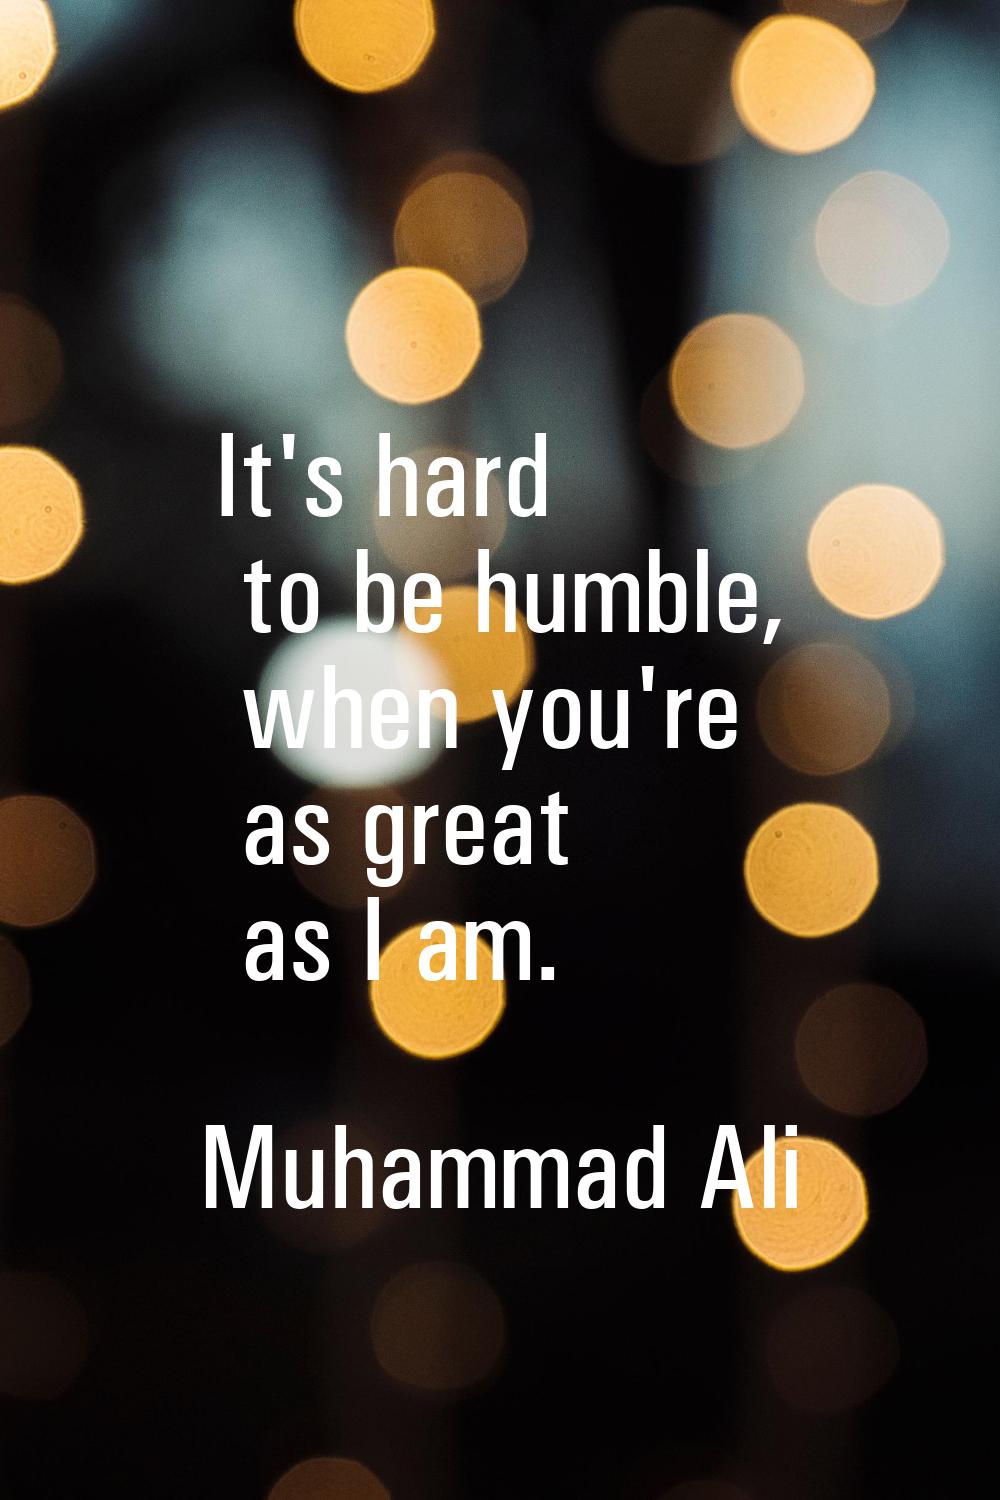 It's hard to be humble, when you're as great as I am.